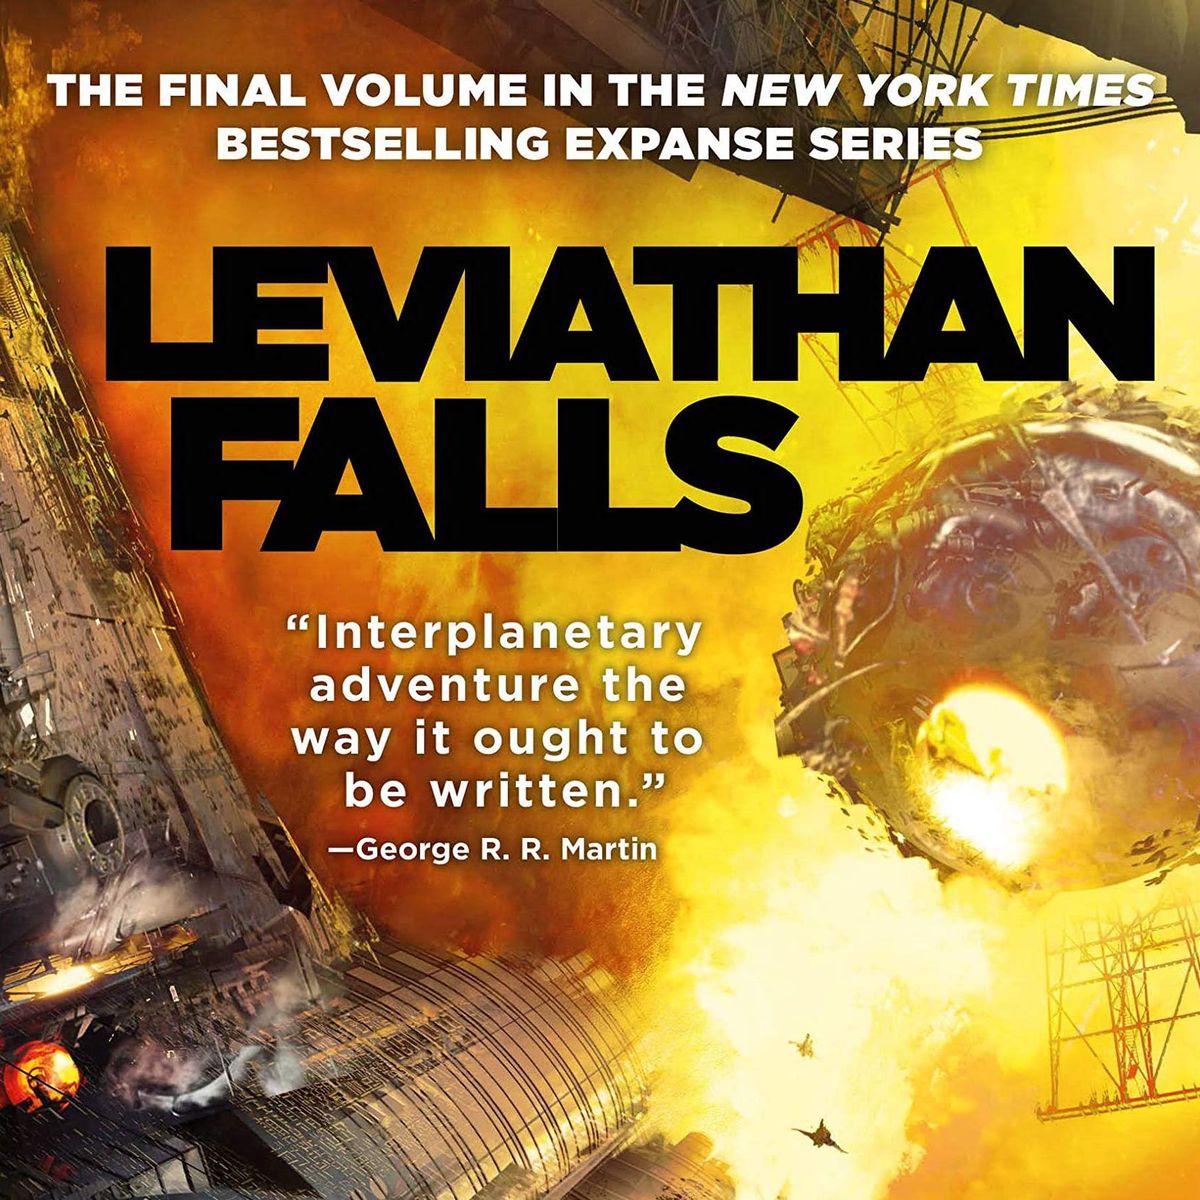 The full cover of Leviathan Falls by James S.A. Corey